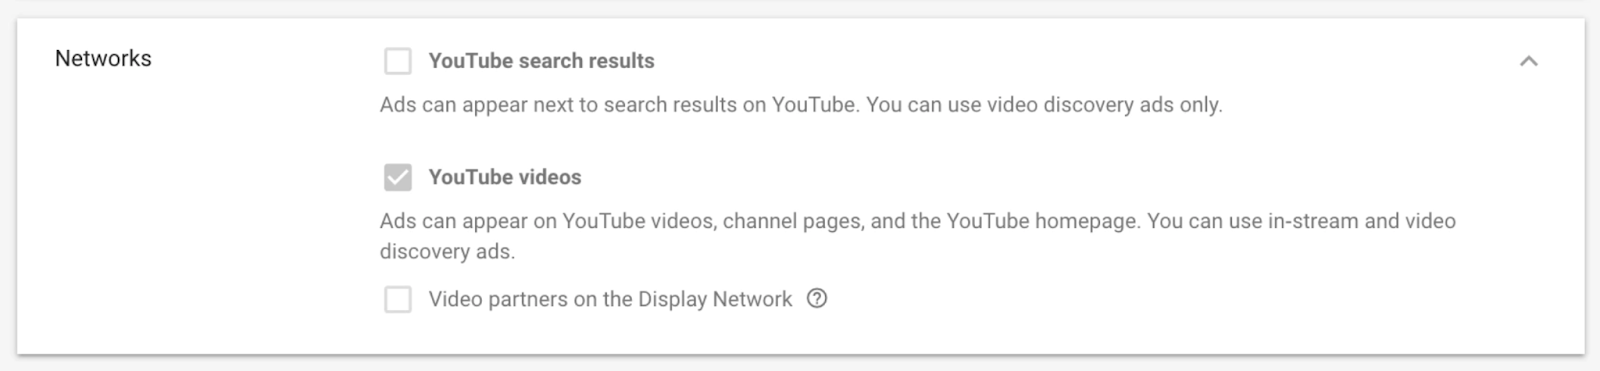 youtube ads  select networks